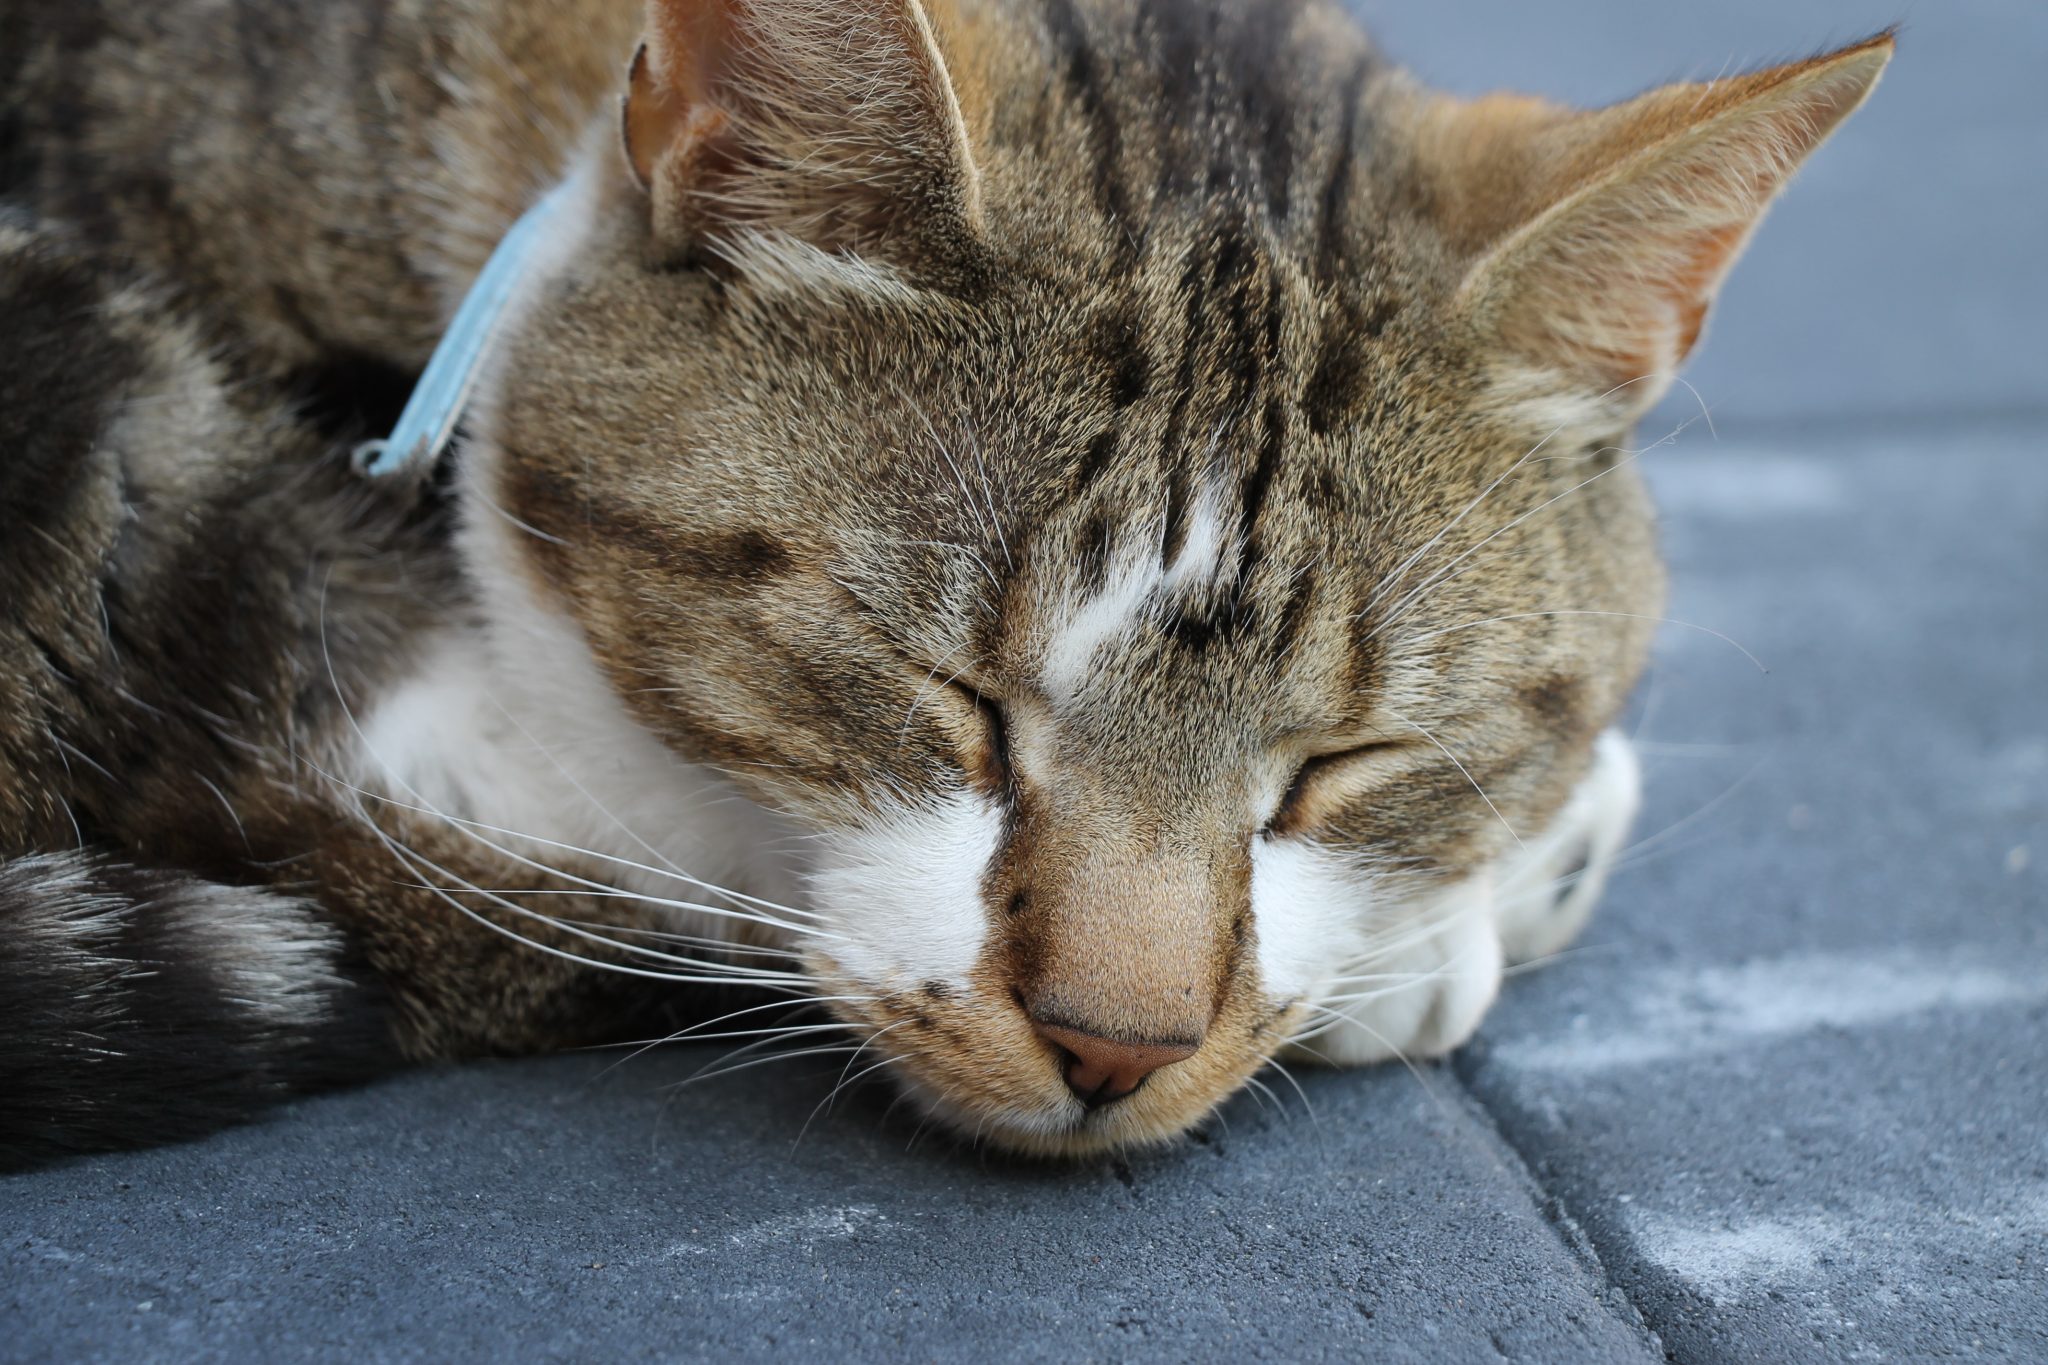 Close-up of a cat, sleeping on concrete tiles